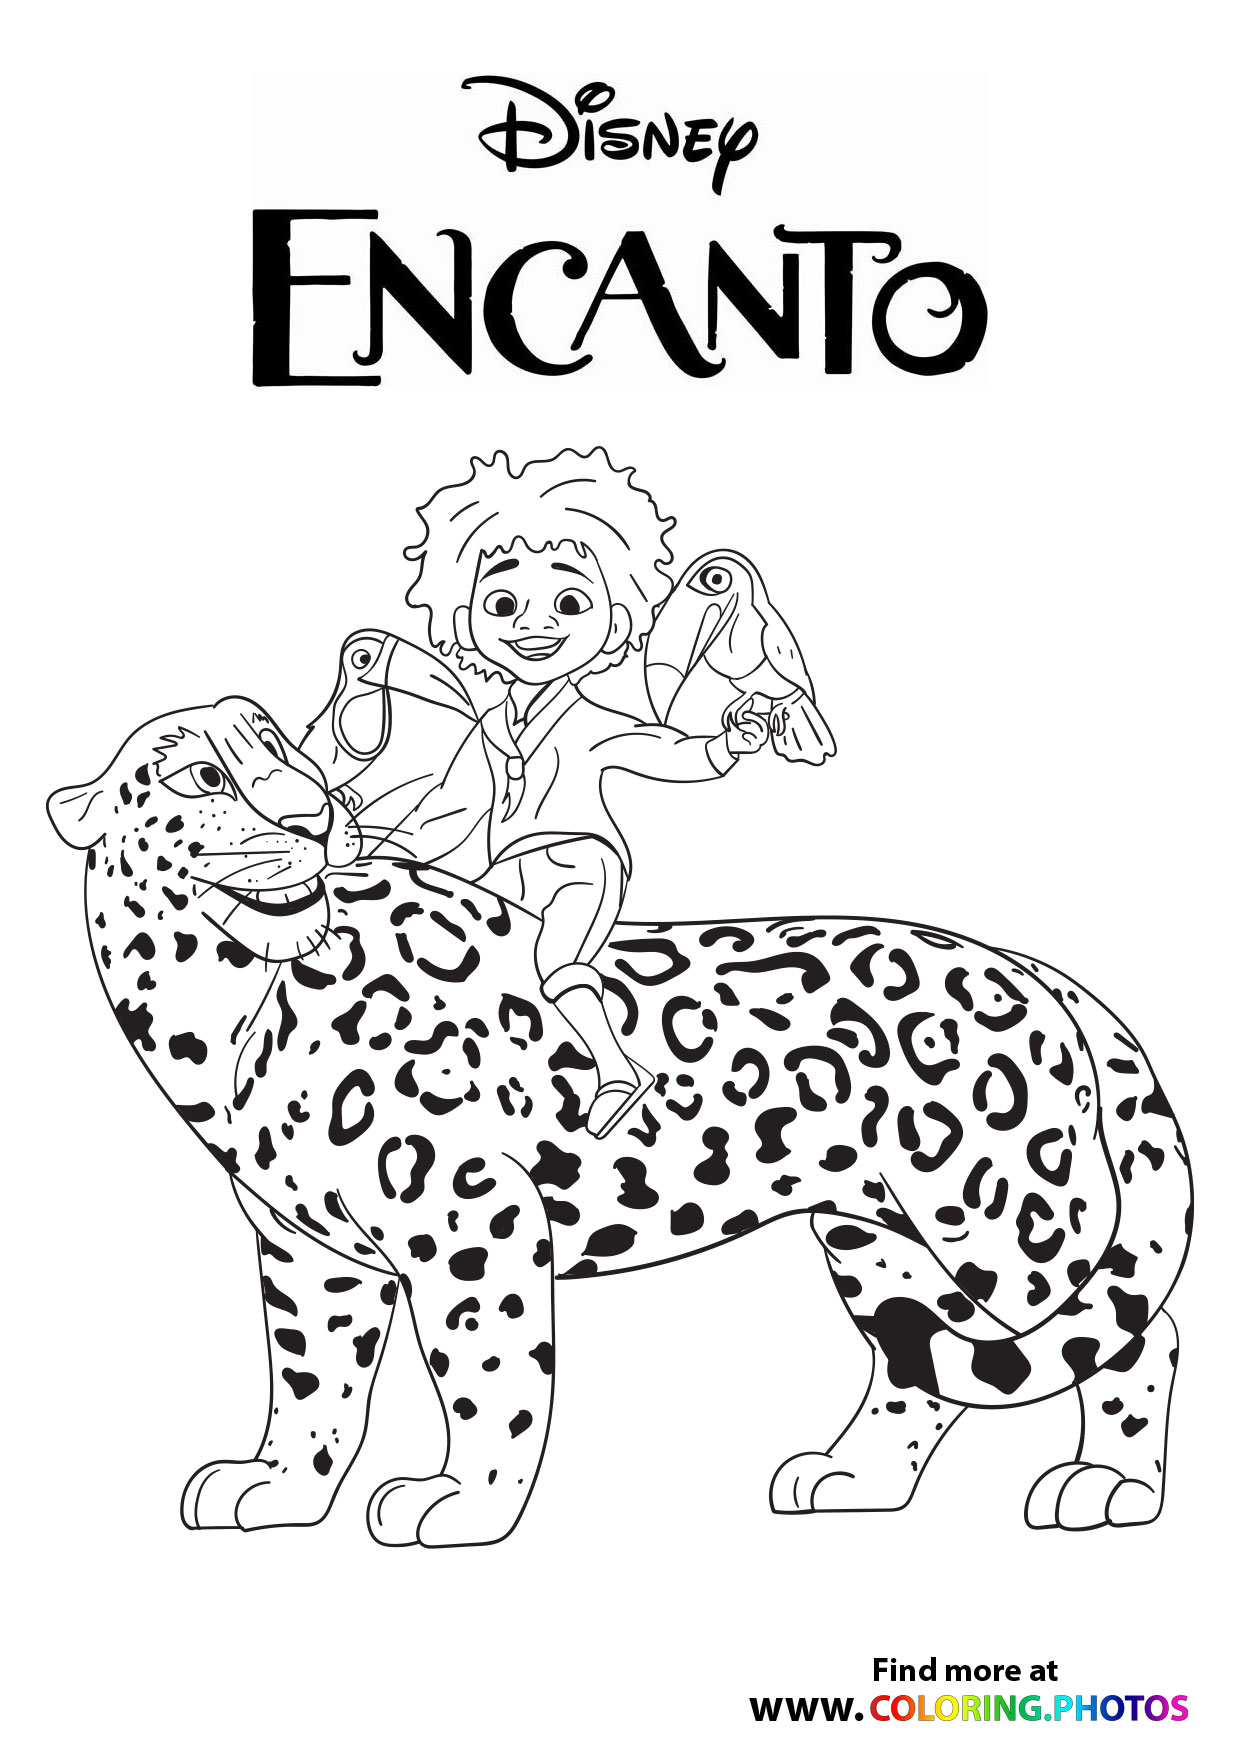 Disney encanto pages for kids free pages for print out